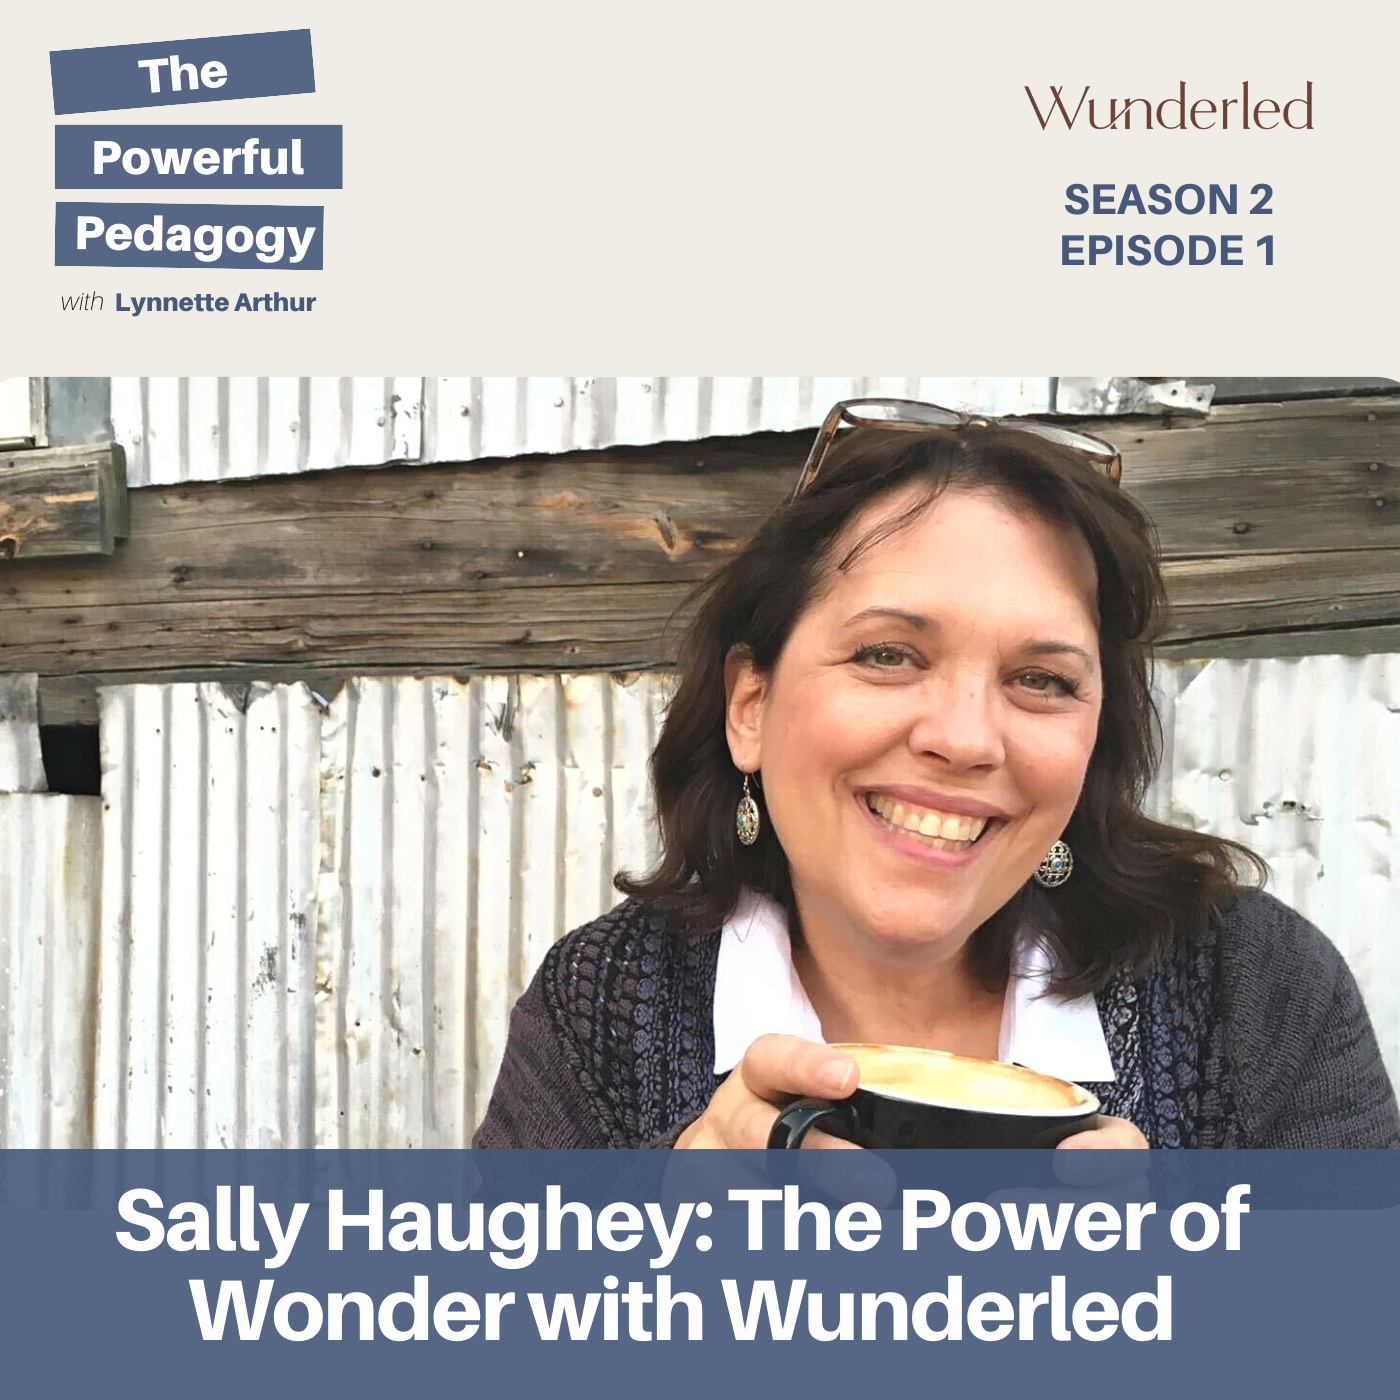 Sally Haughey: The Power of Wonder with Wunderled